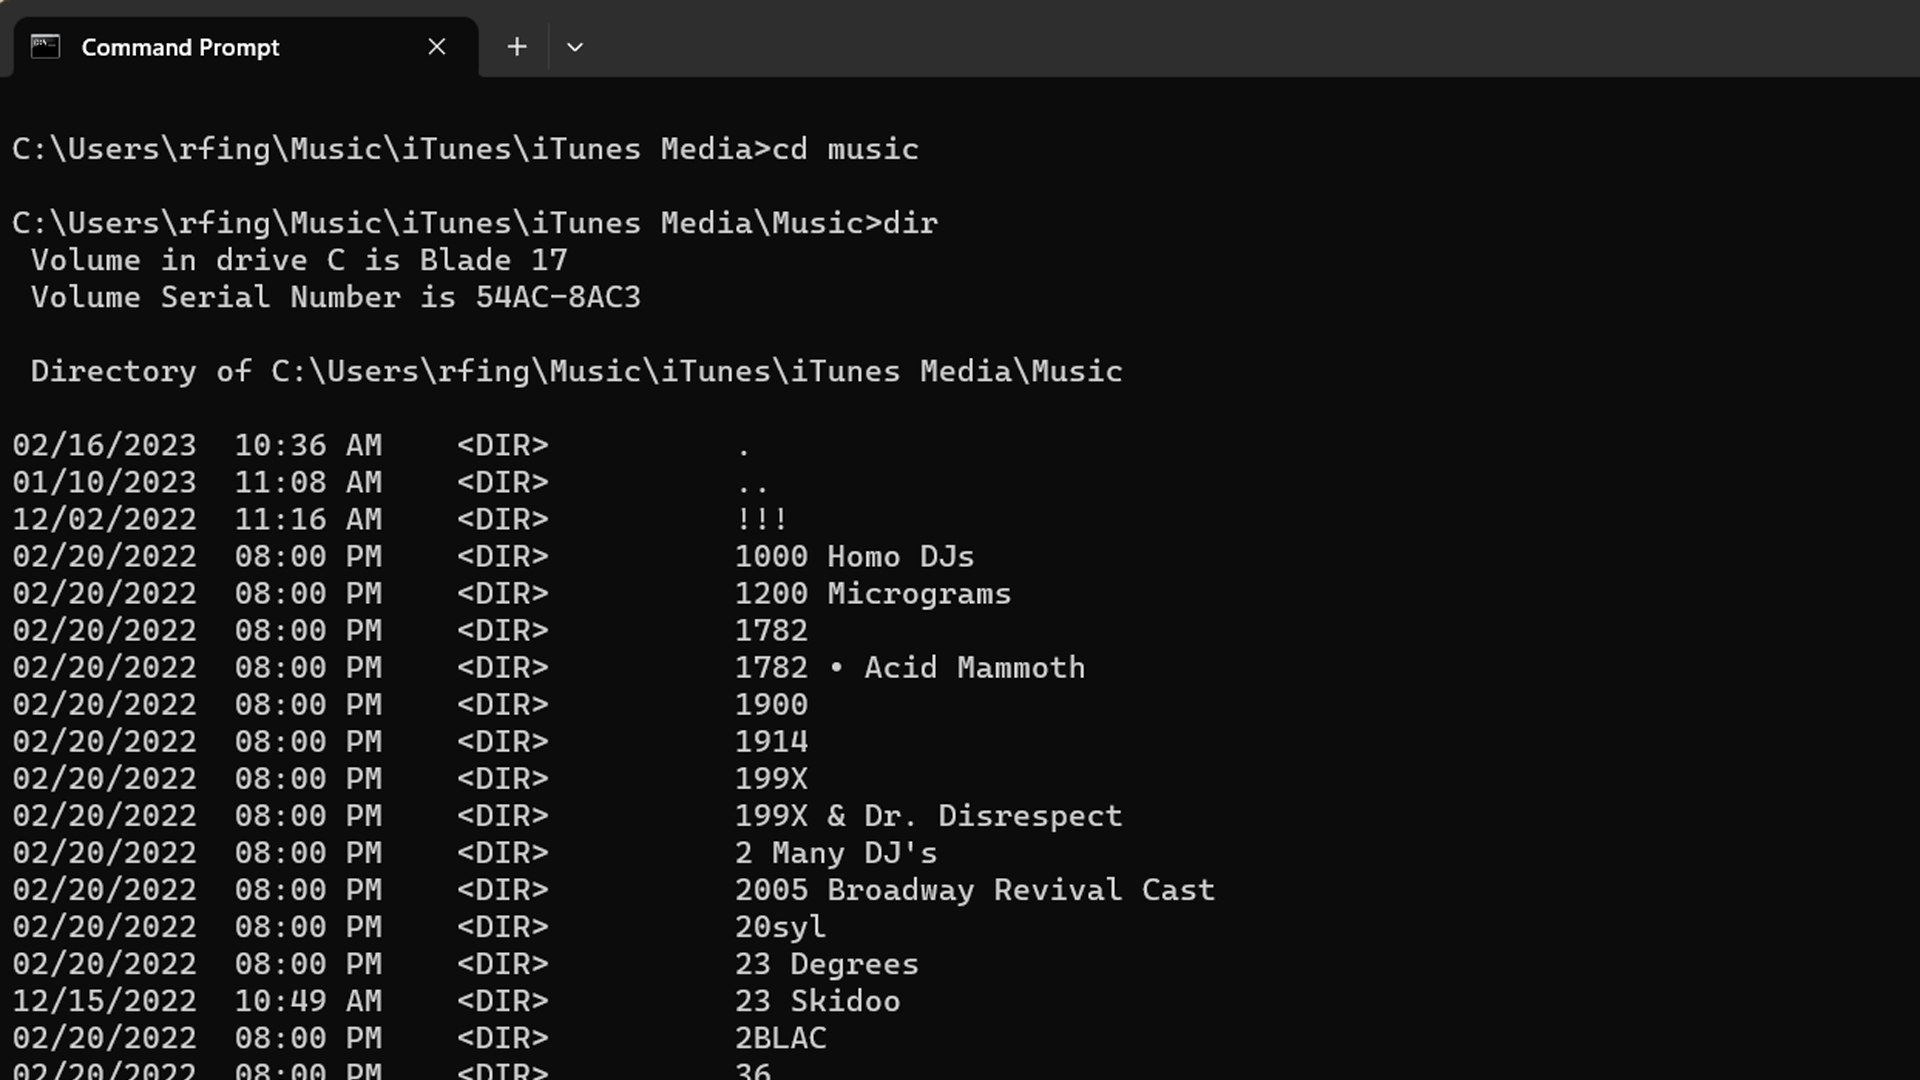 Navigating directories in Command Prompt